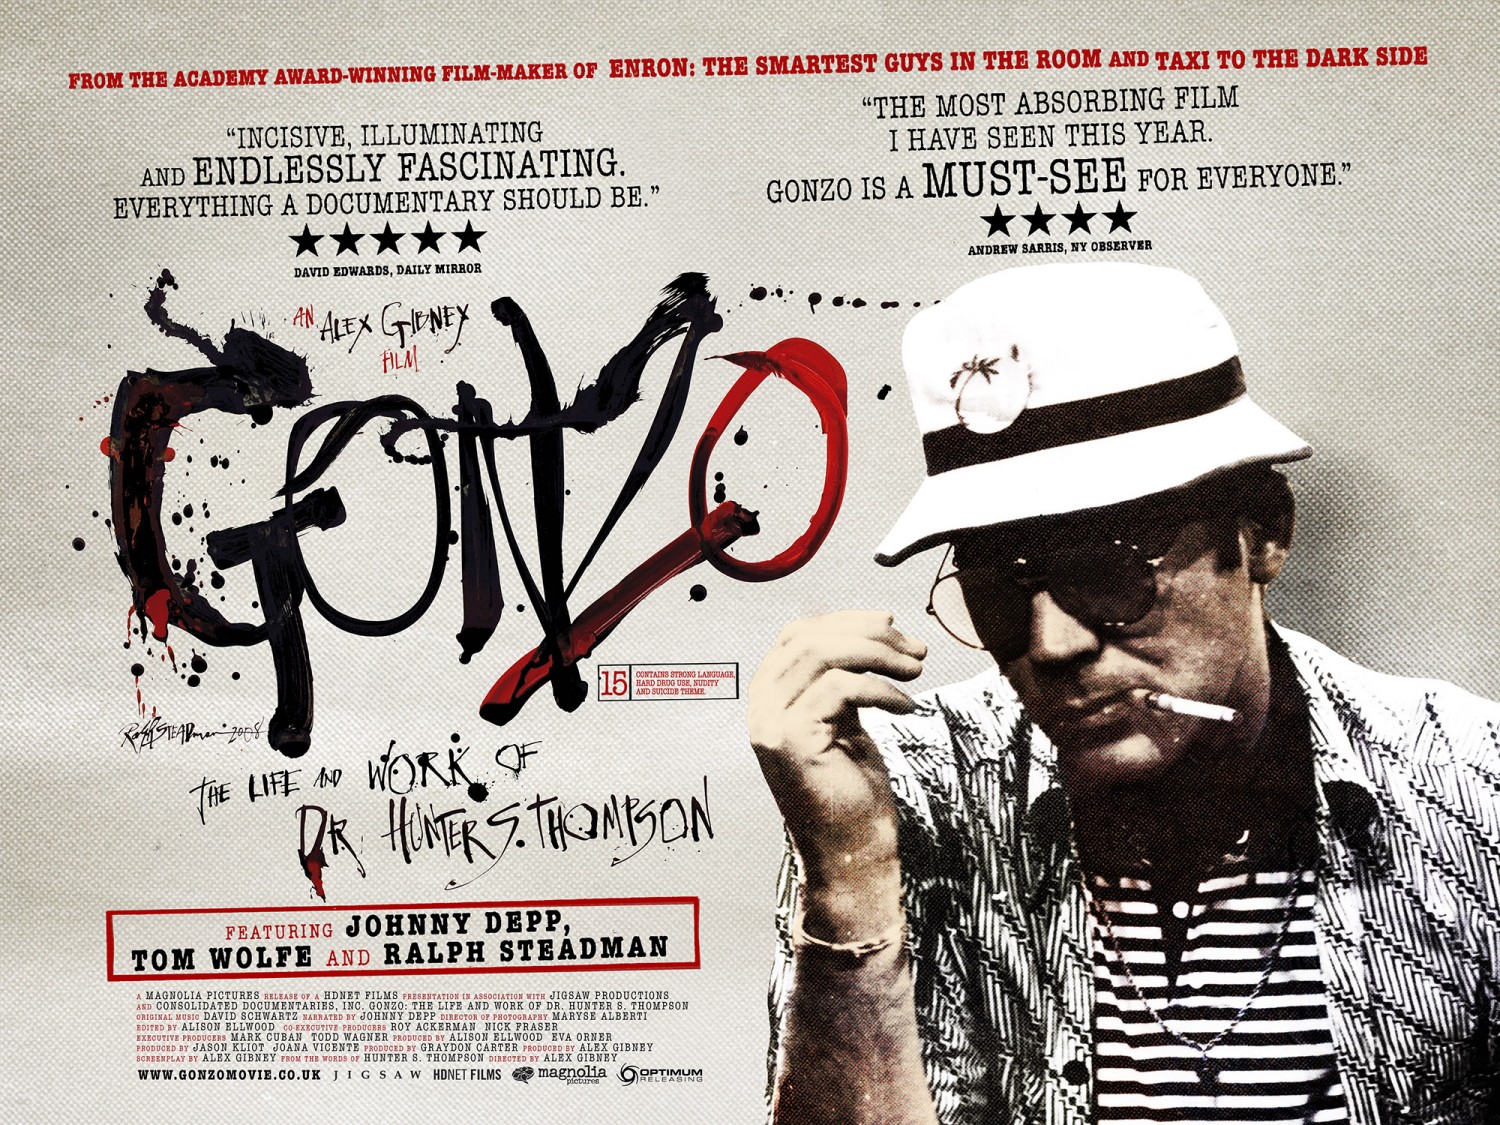 Extra Large Movie Poster Image for Gonzo: The Life and Work of Dr. Hunter S. Thompson (#2 of 2)